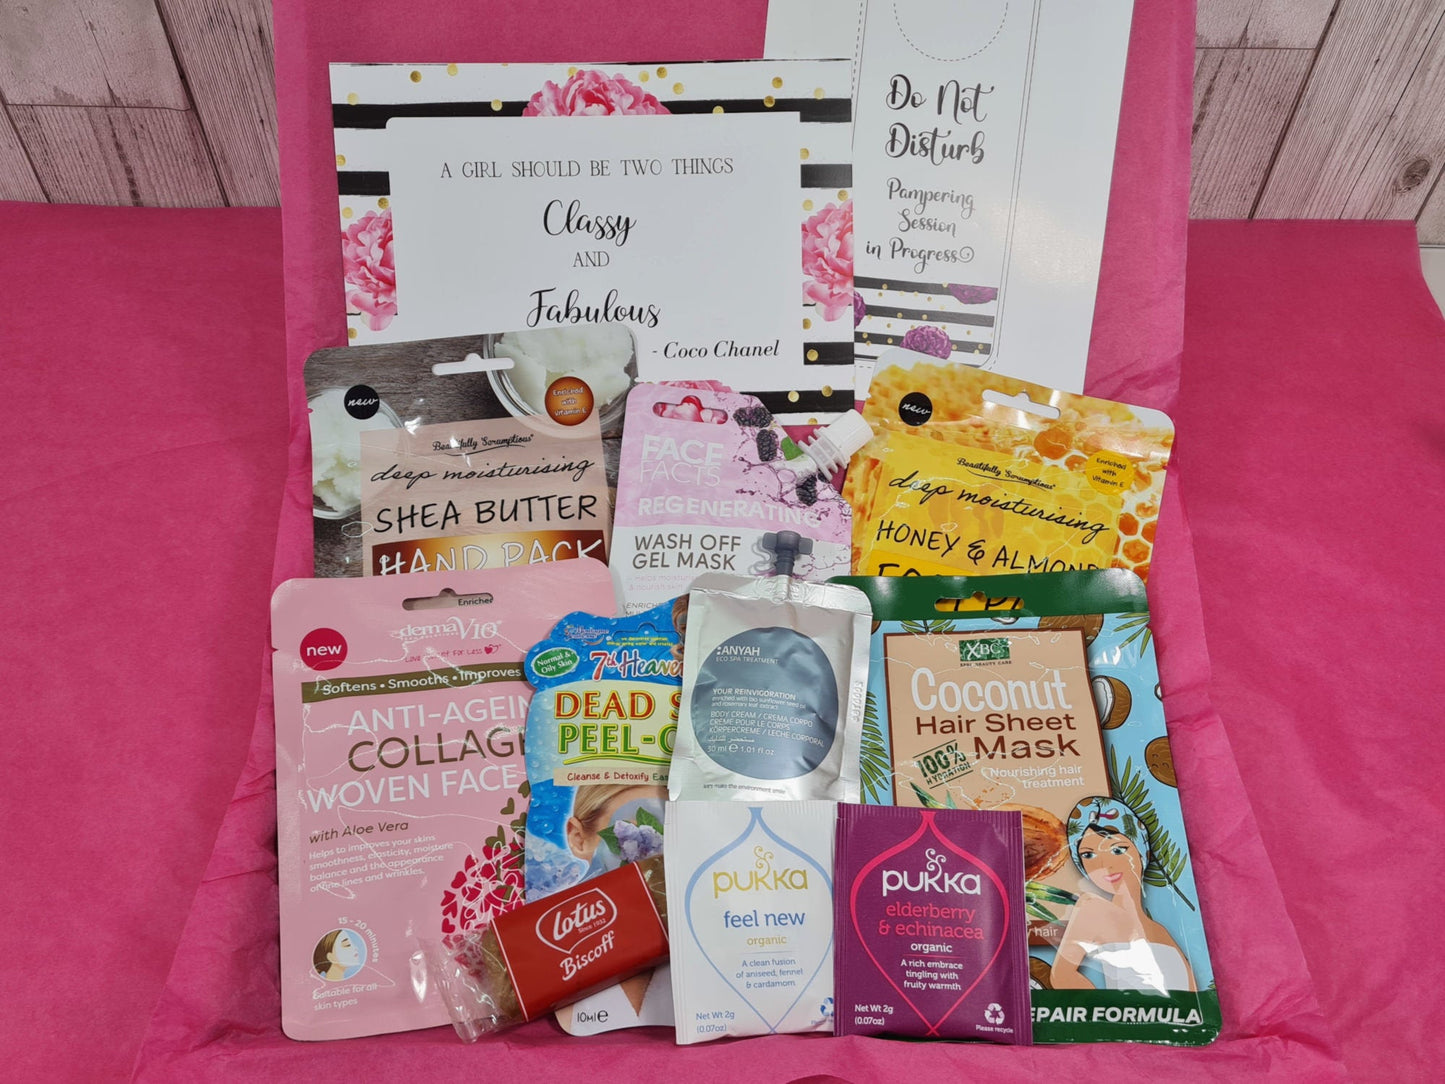 Spa Gift Box Friend Birthday Gift, Pink Self Care Pamper Package Cheer Up Letterbox Mani Pedi Face Hair